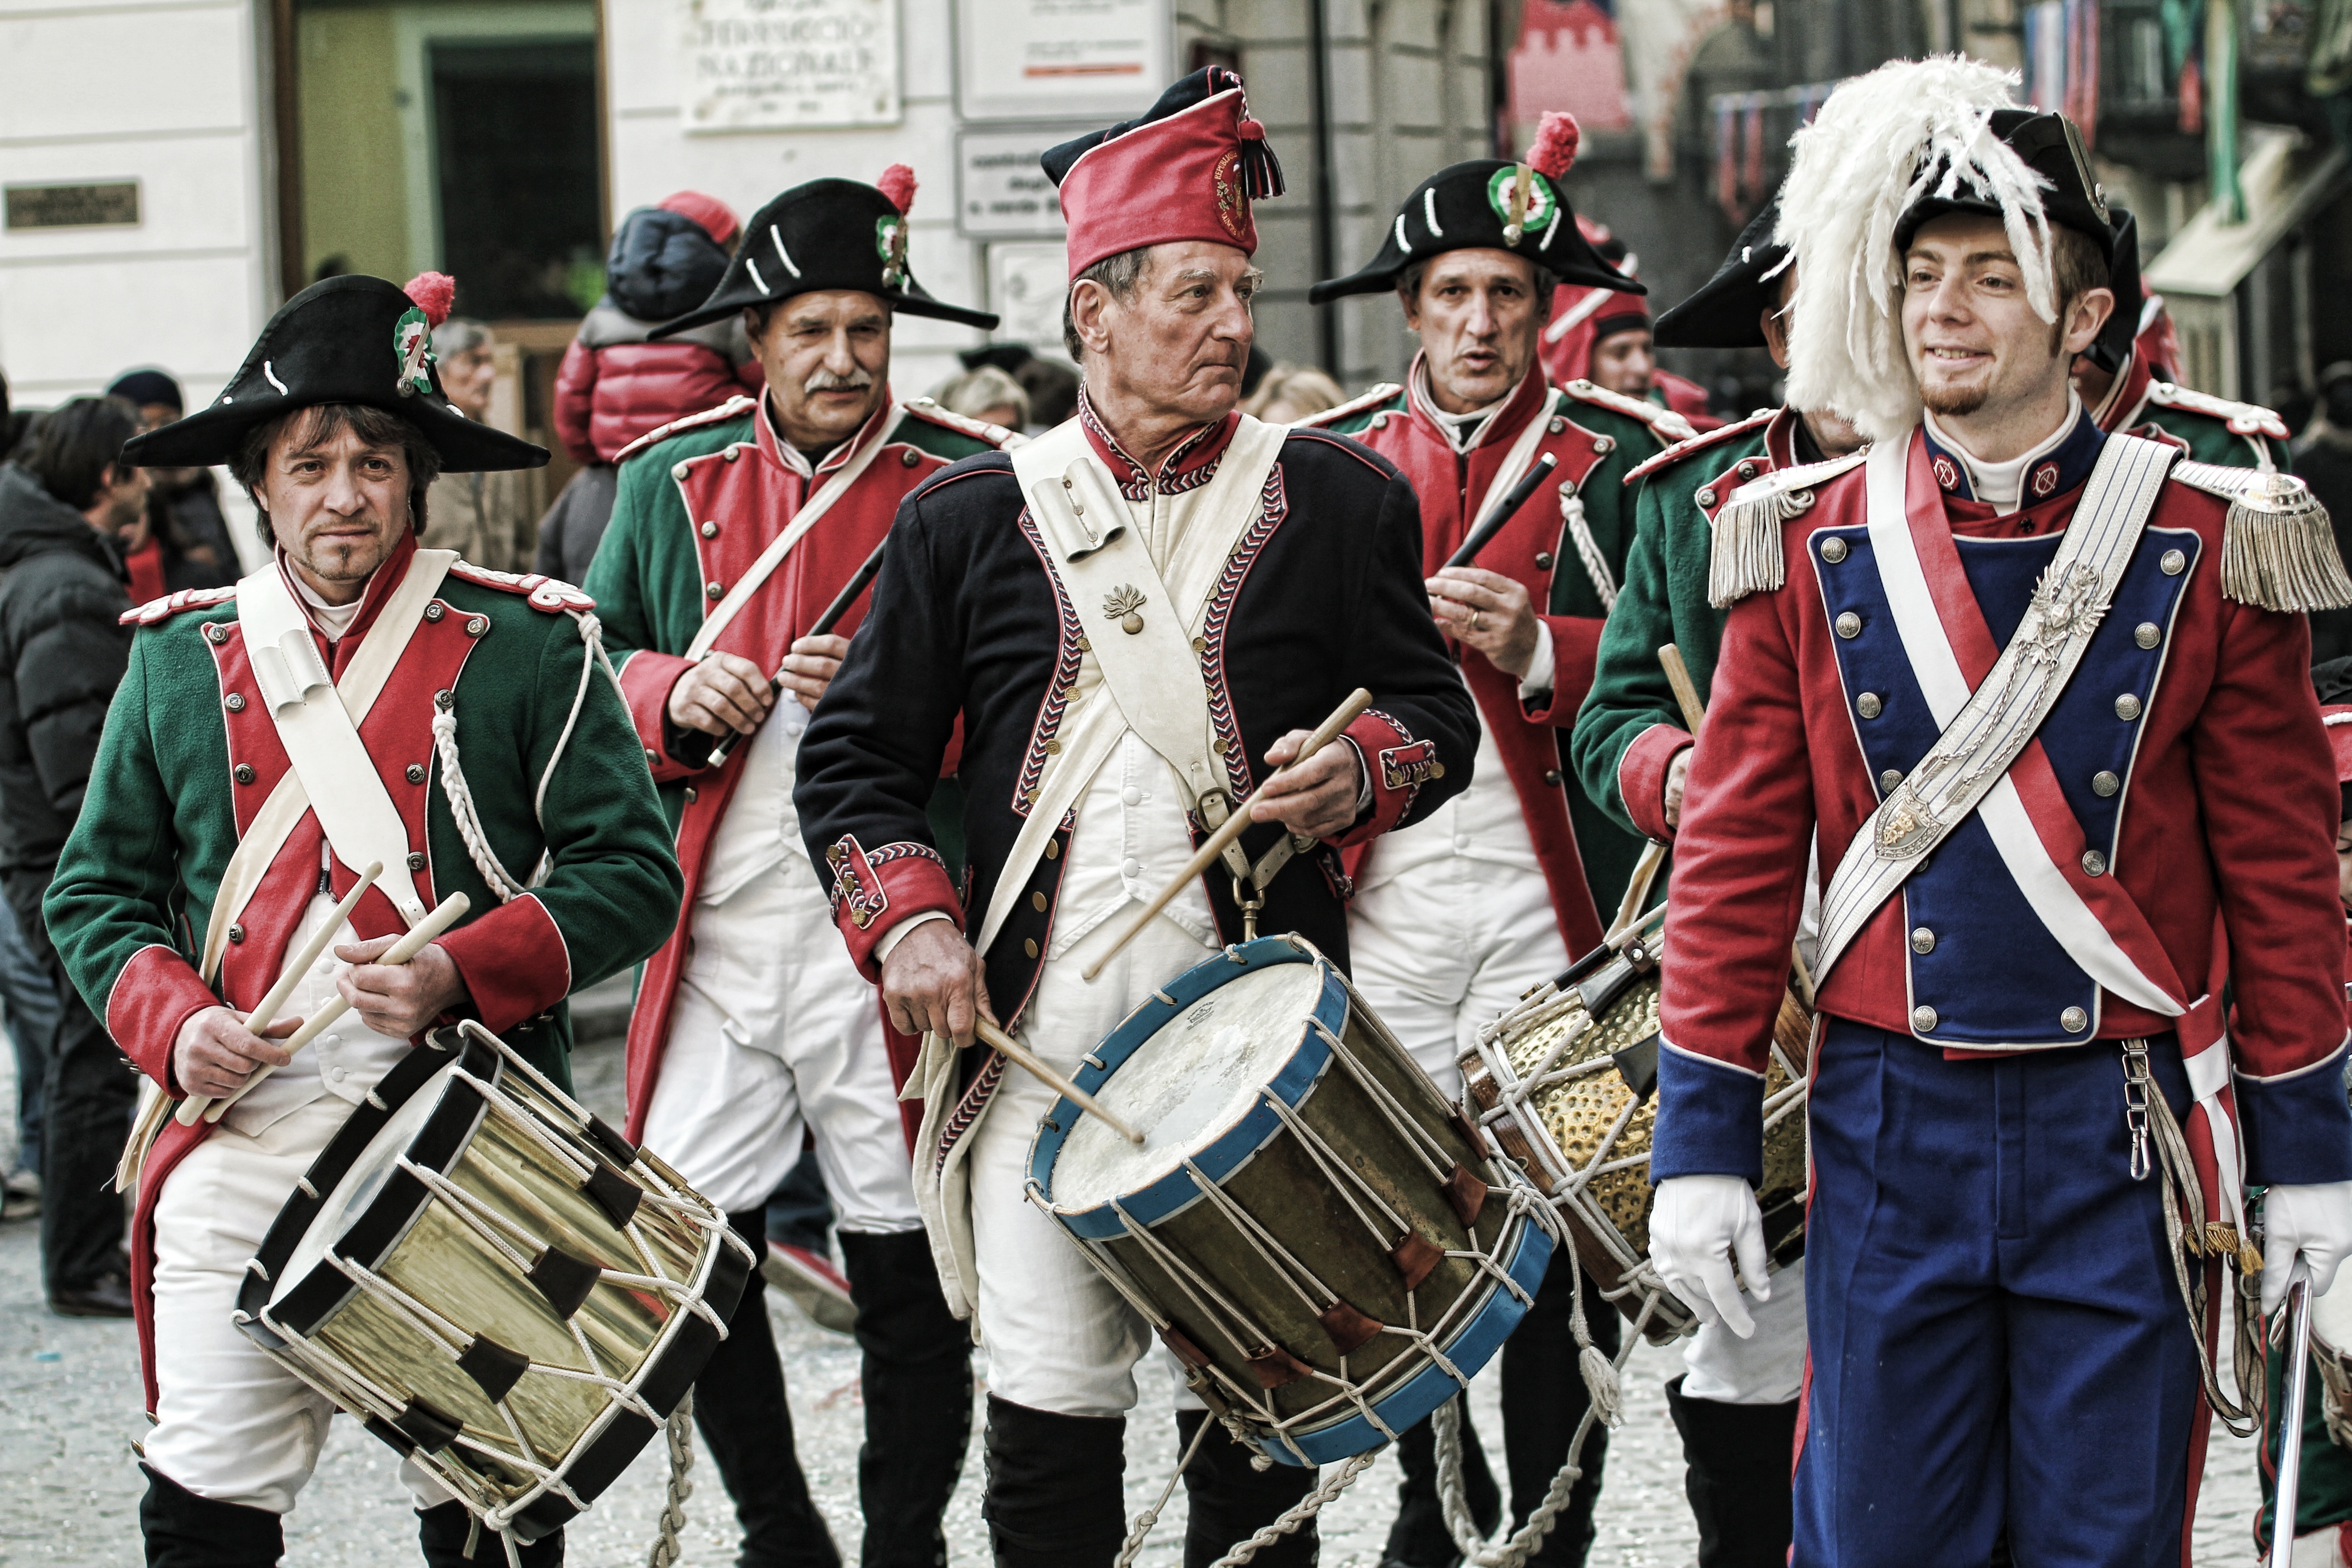 Men in historical clothing on parade